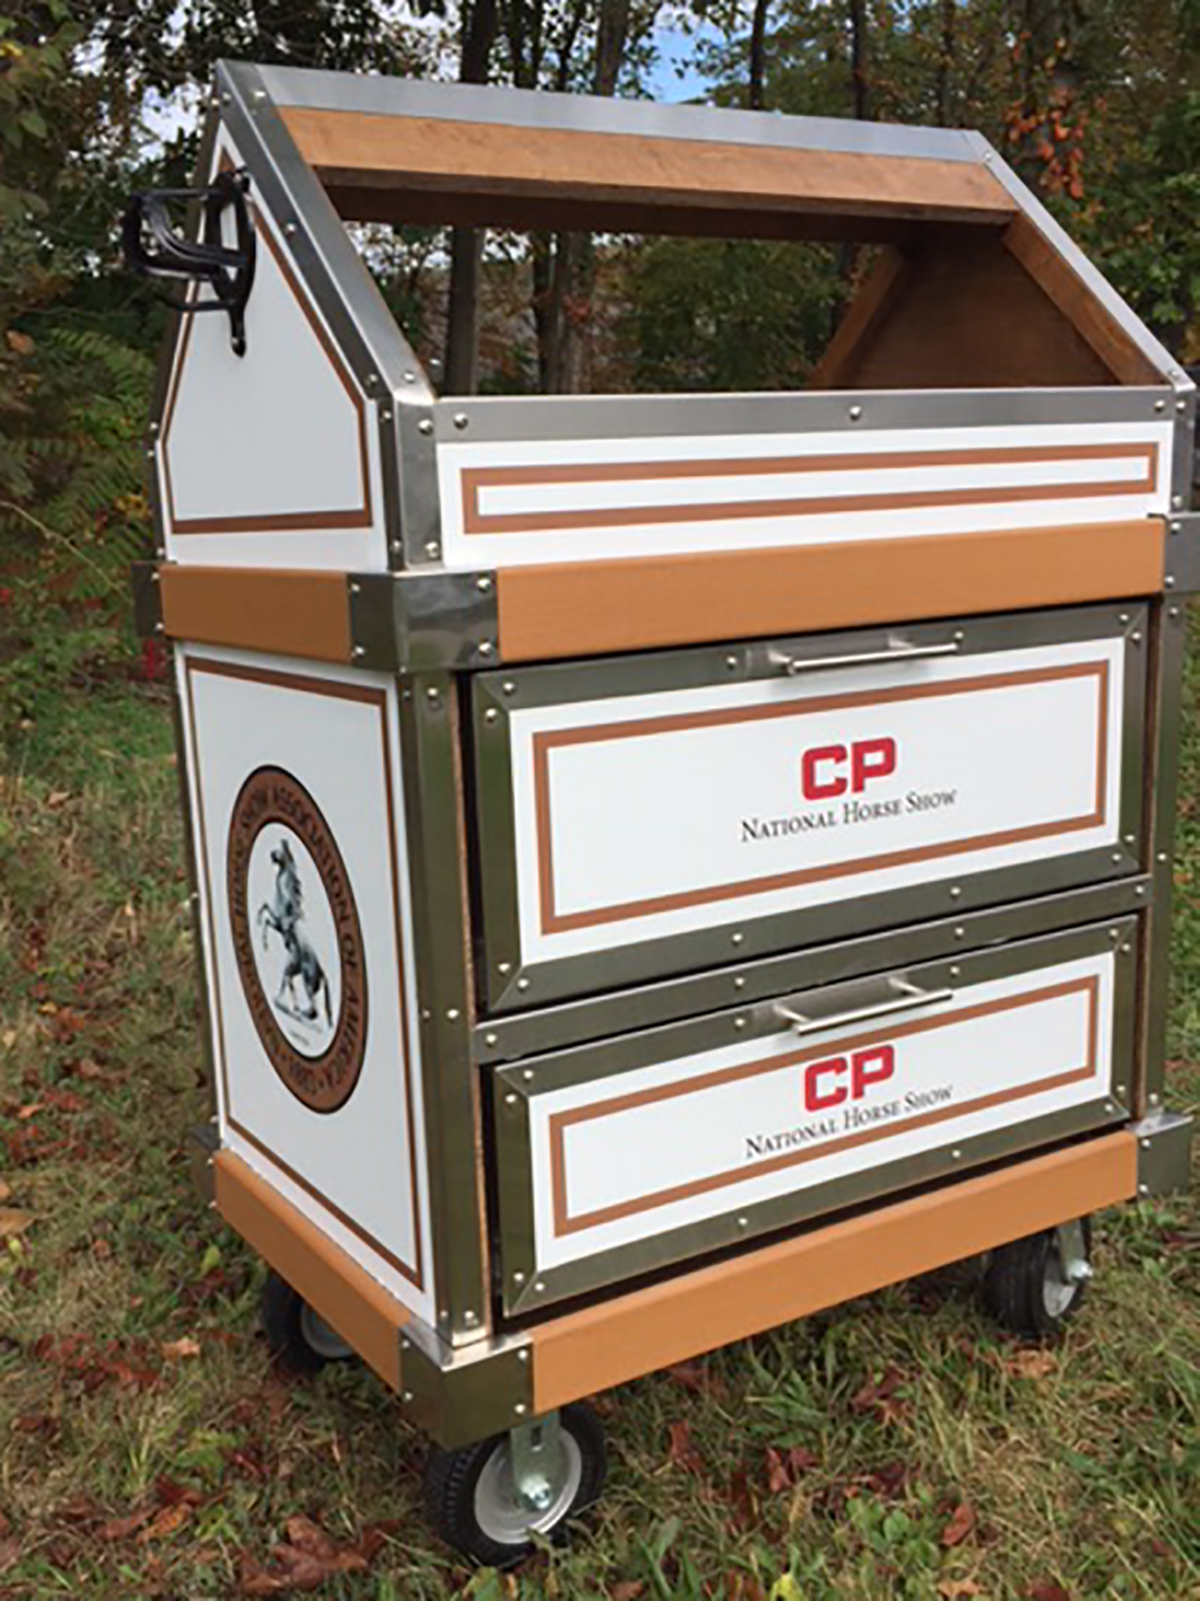 Top Jock Tack Boxes Heads to World Equestrian Center and National Horse Show This Month